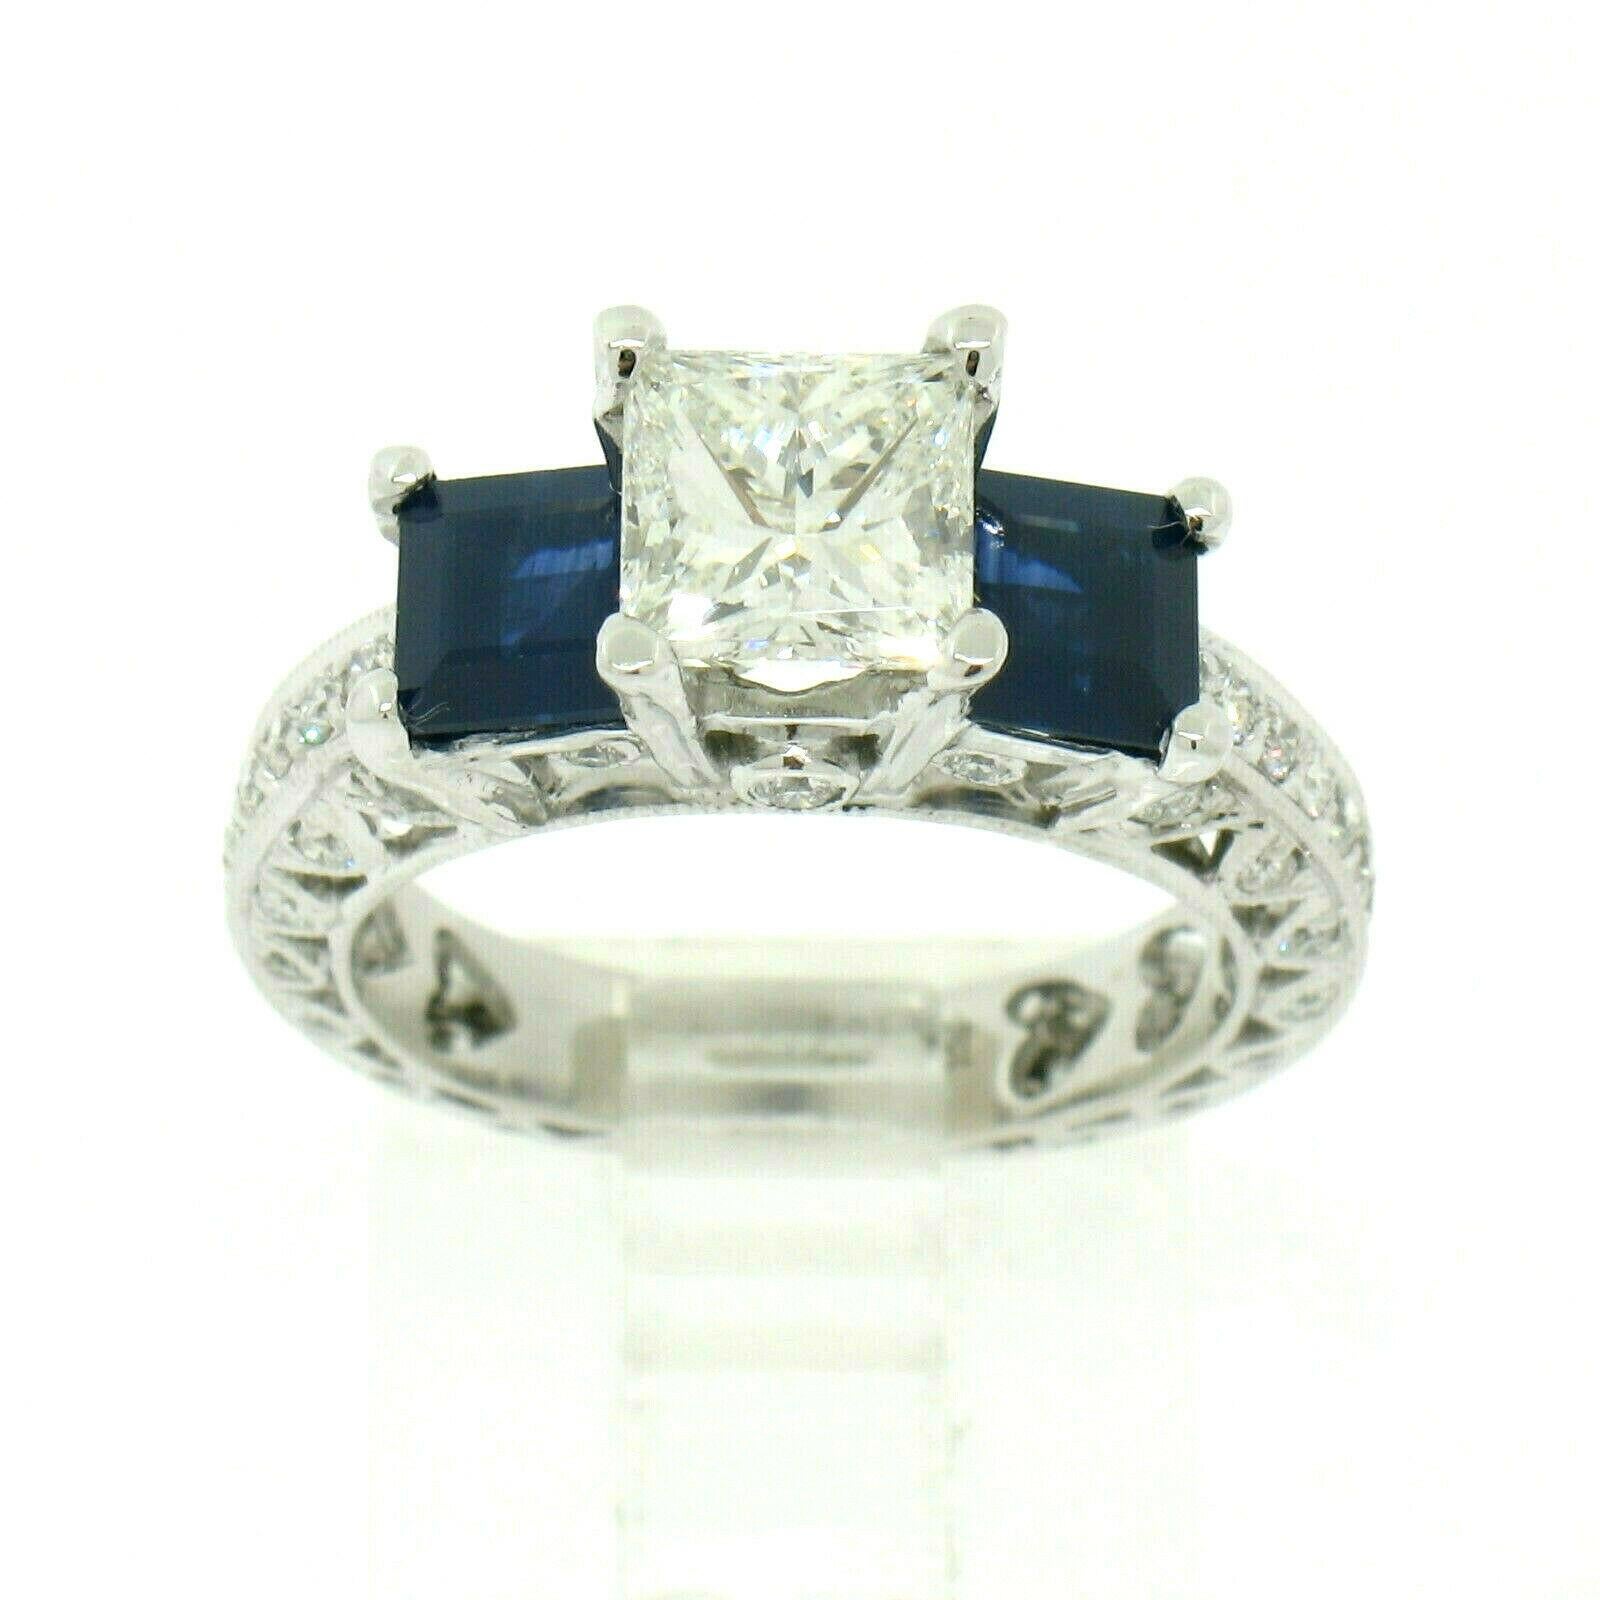 You are looking at a stunning diamond and sapphire engagement ring crafted in solid 18k white gold. The ring features a spectacular princess cut diamond solitaire, prong set at the center of the design. This center diamond is GIA certified, weighs